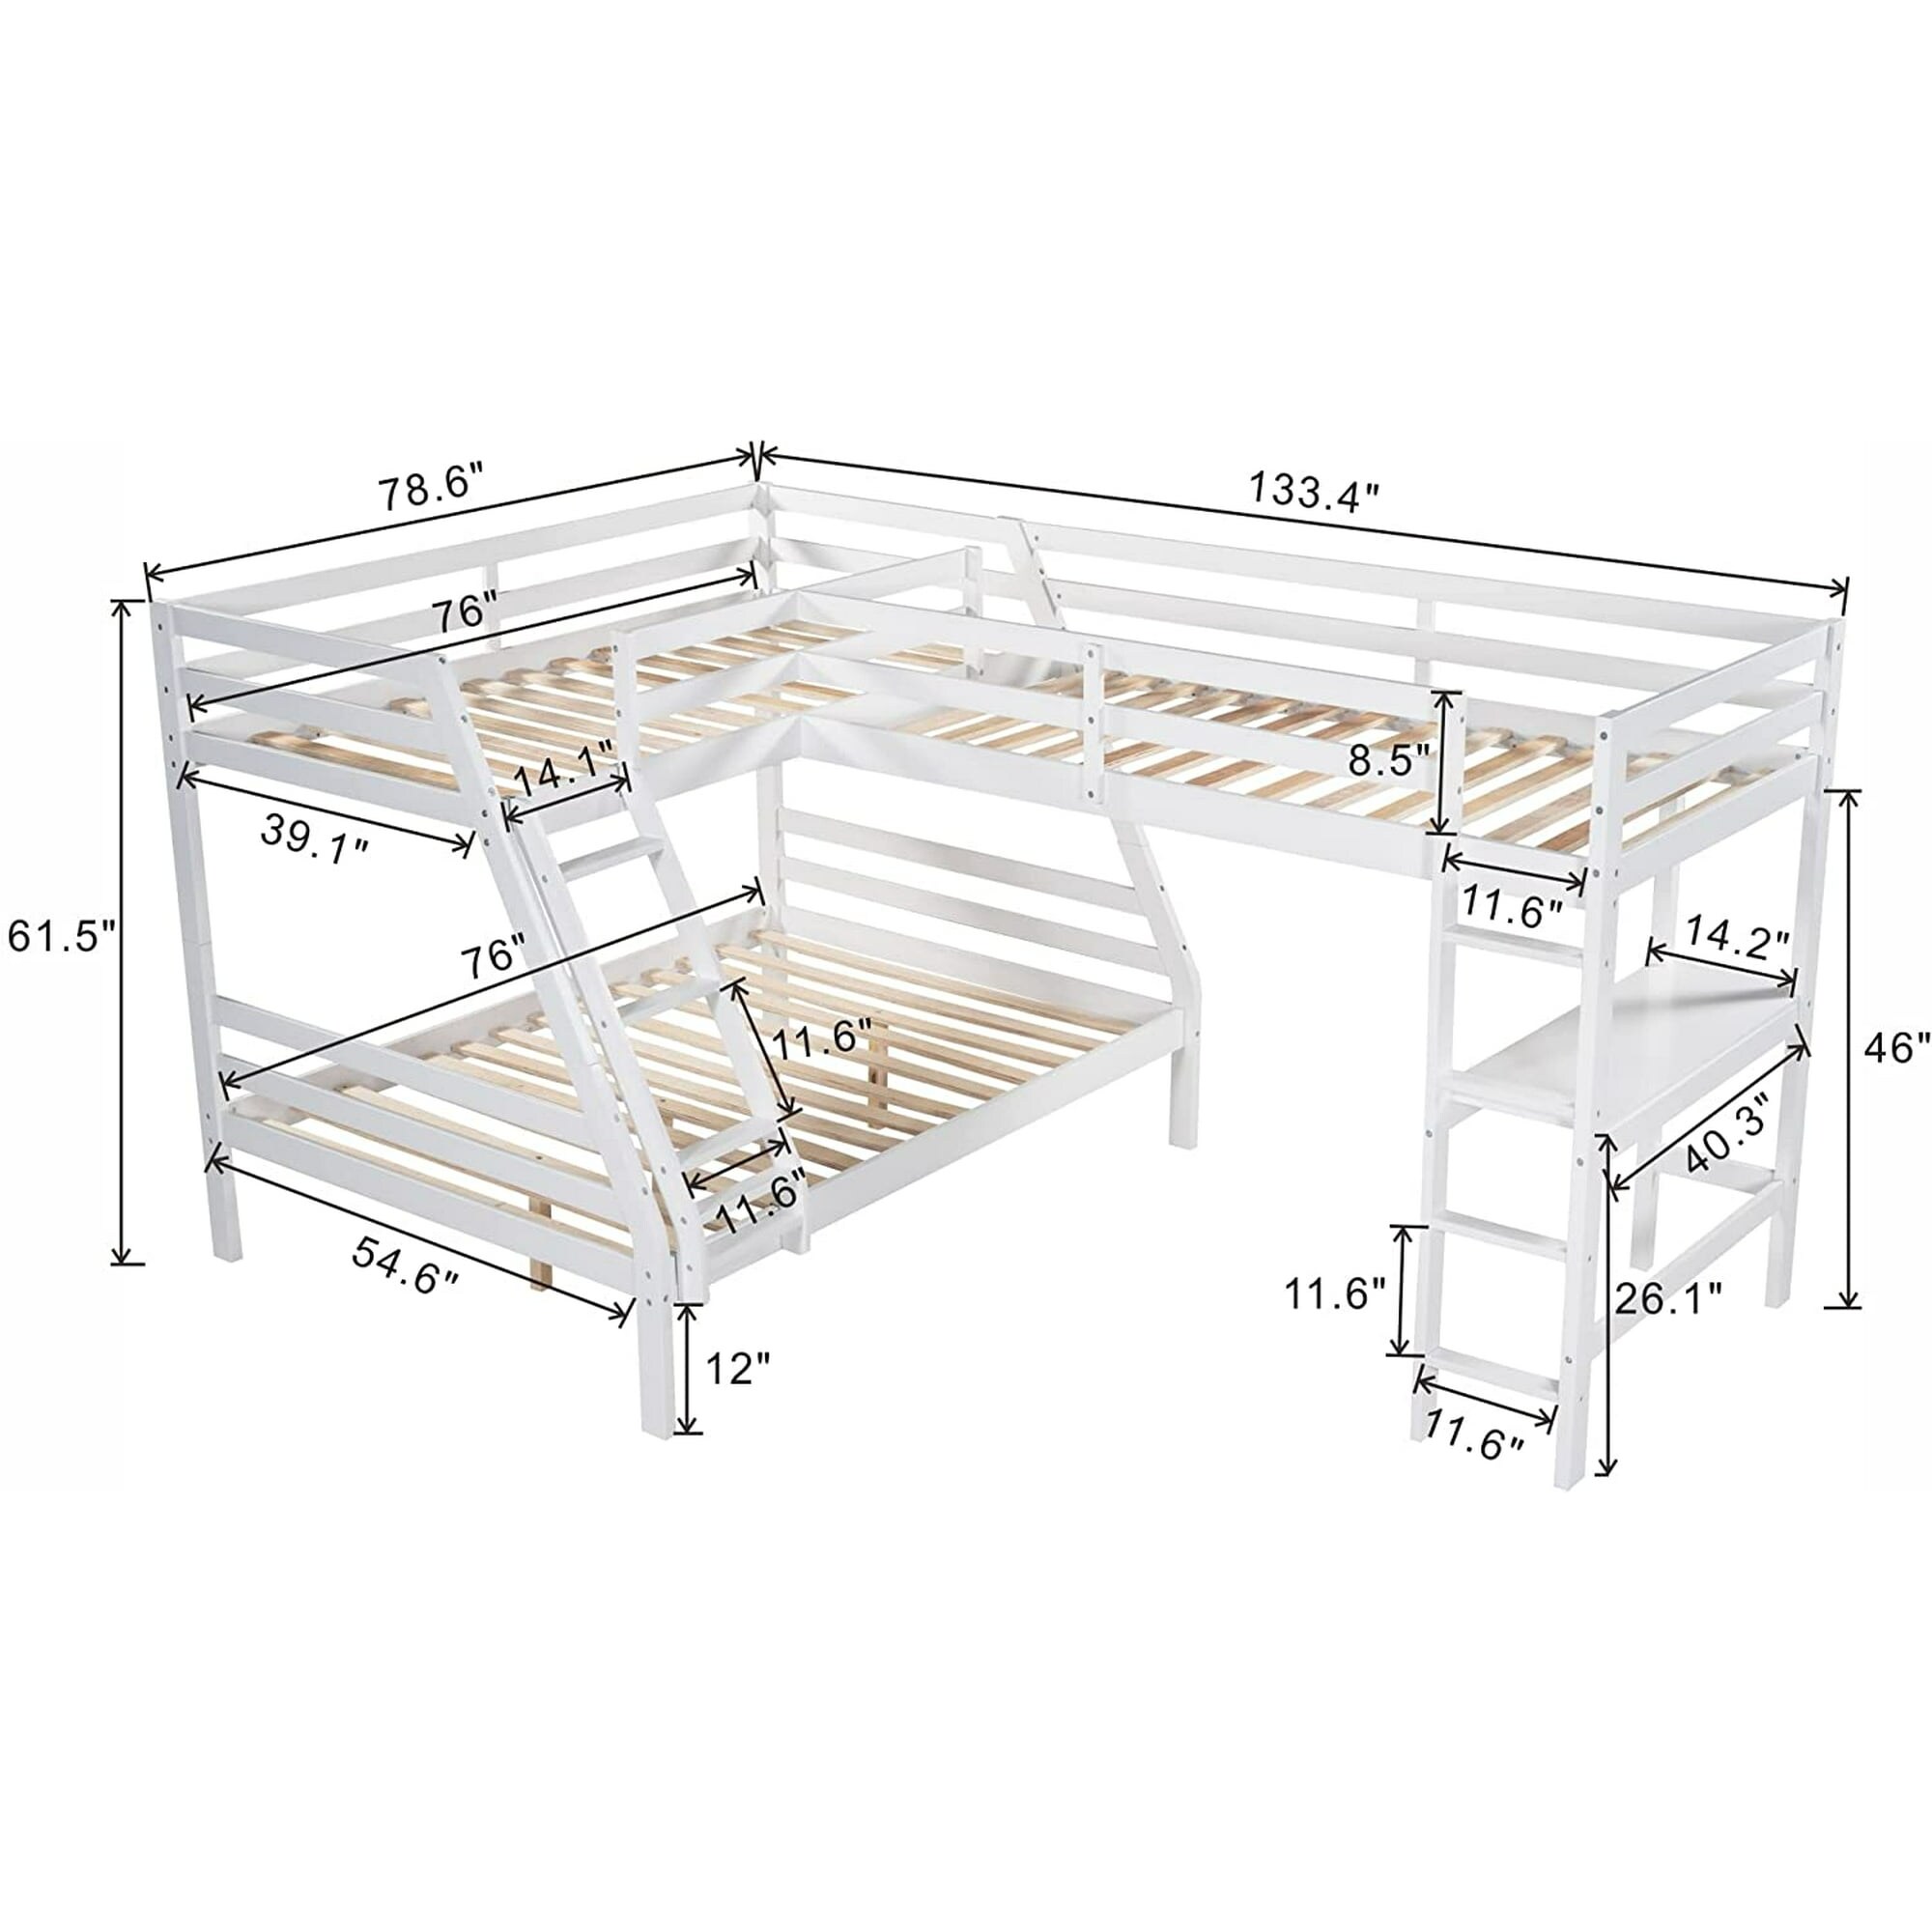 L-Shaped Twin/Full Bunk Bed & Twin Loft Bed with Desk